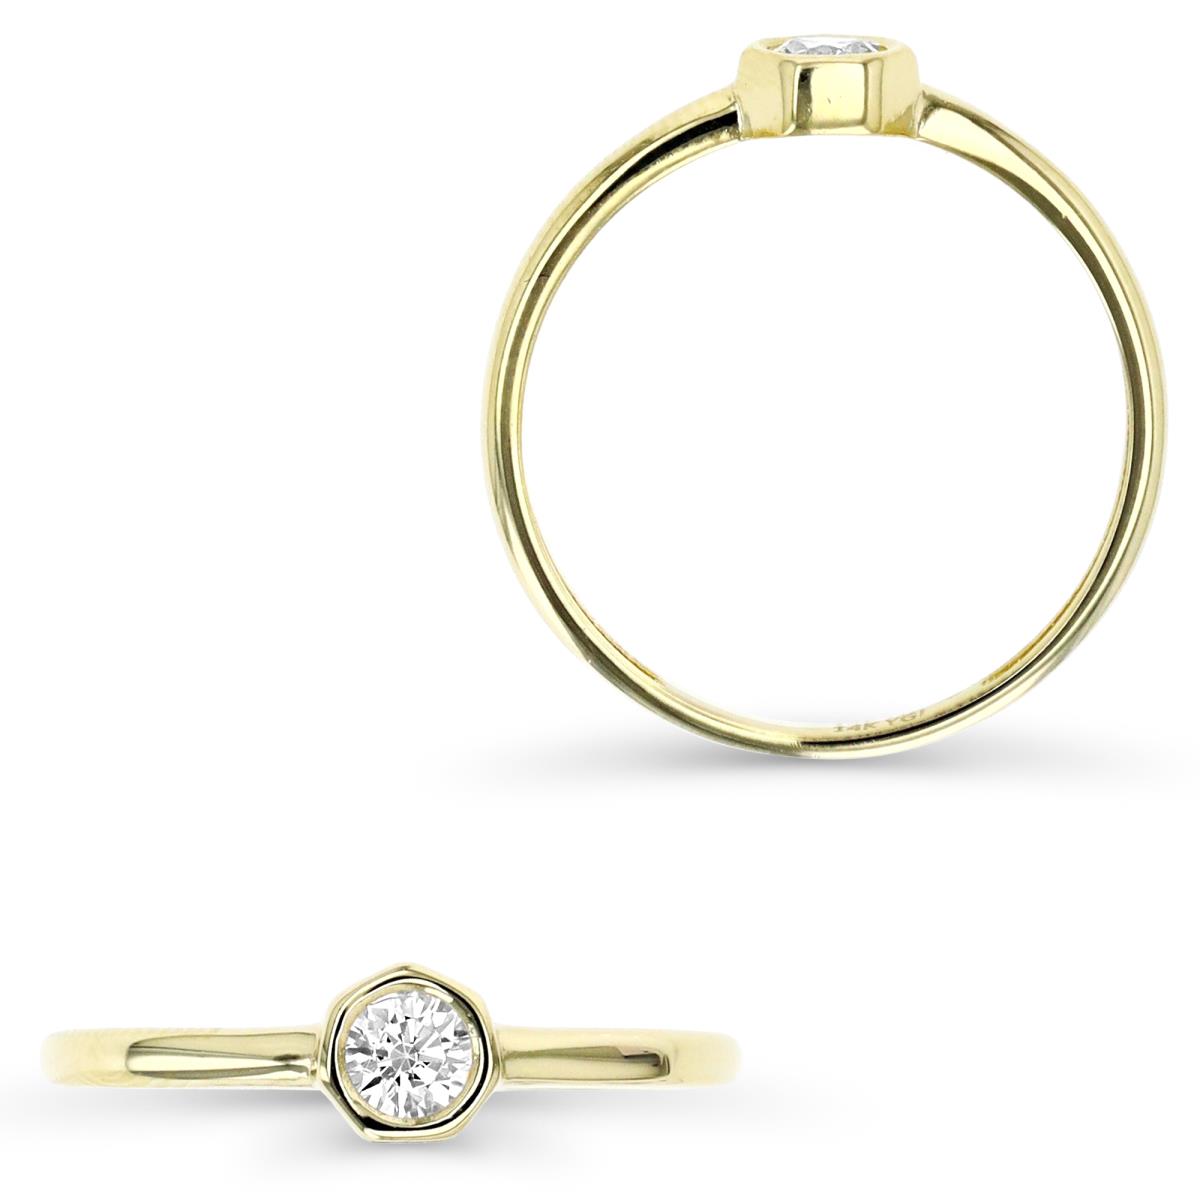 10K Yellow Gold 3.5mm Solitaire Octagon Bezel Ring